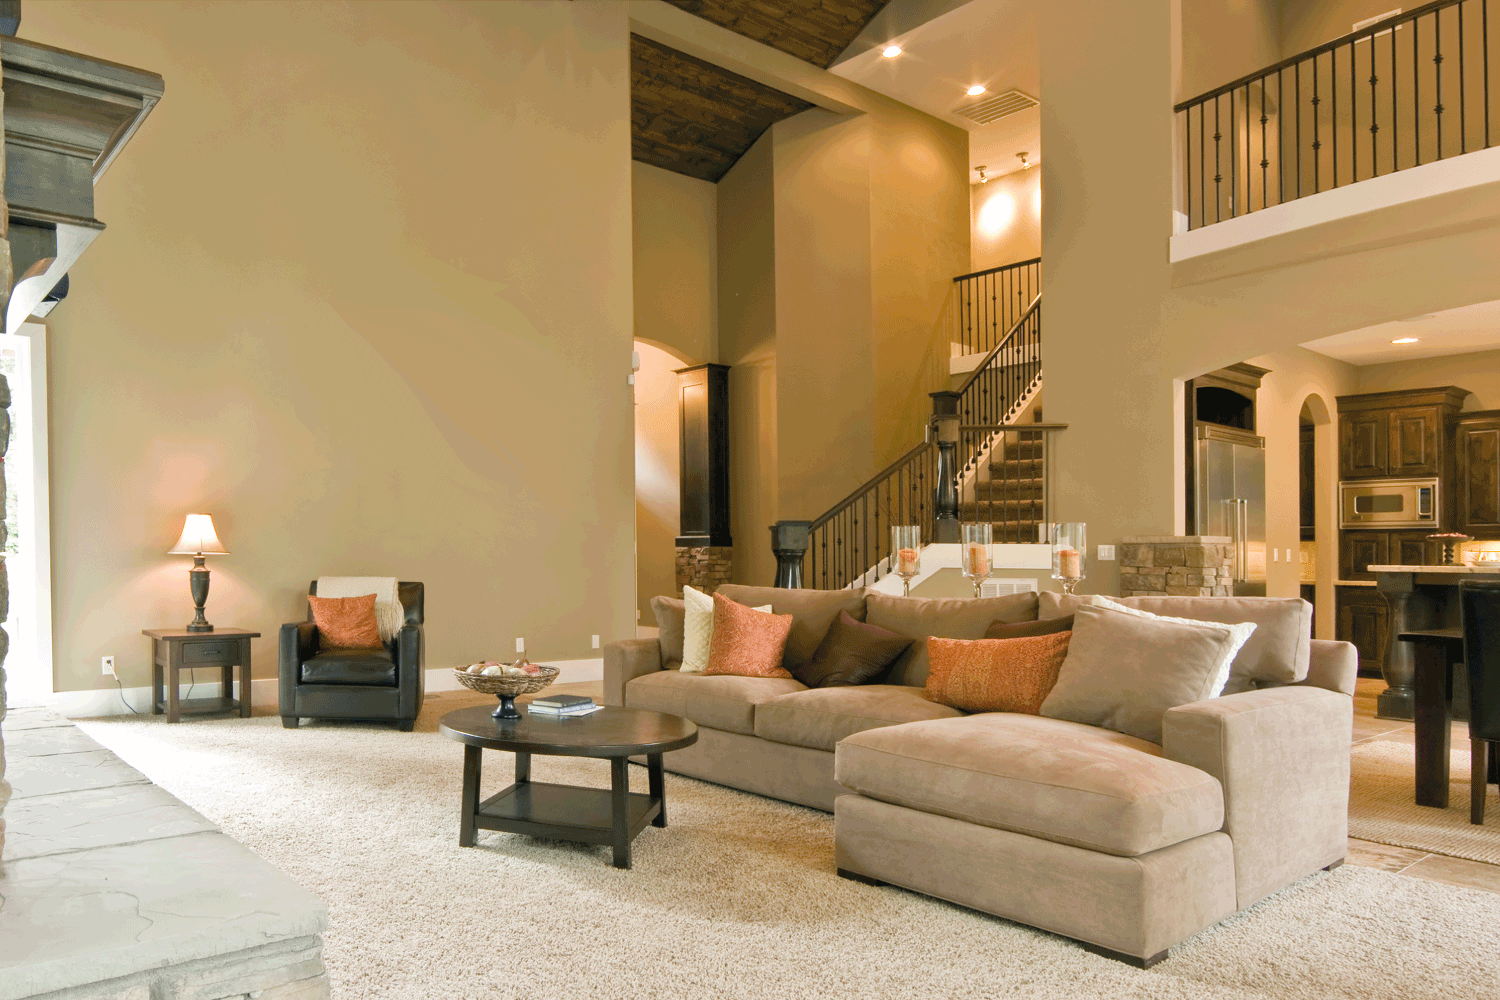 Living Room Panorama in Luxury Home, peach accents